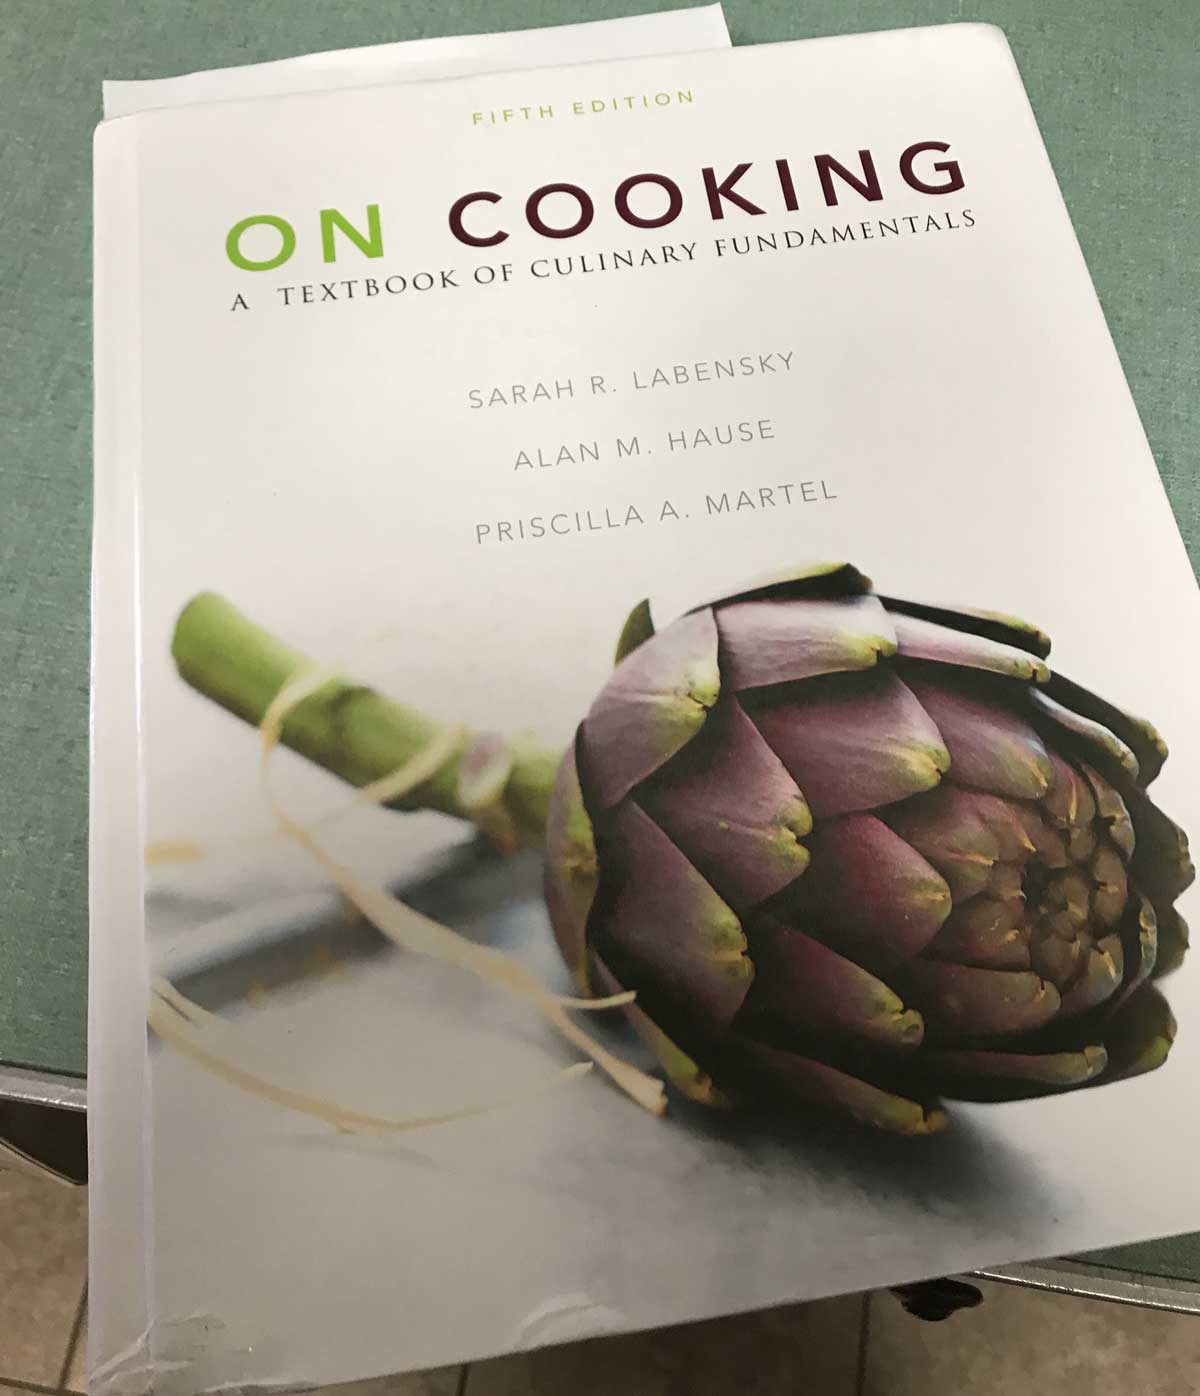 My Journey to Become the CHEF